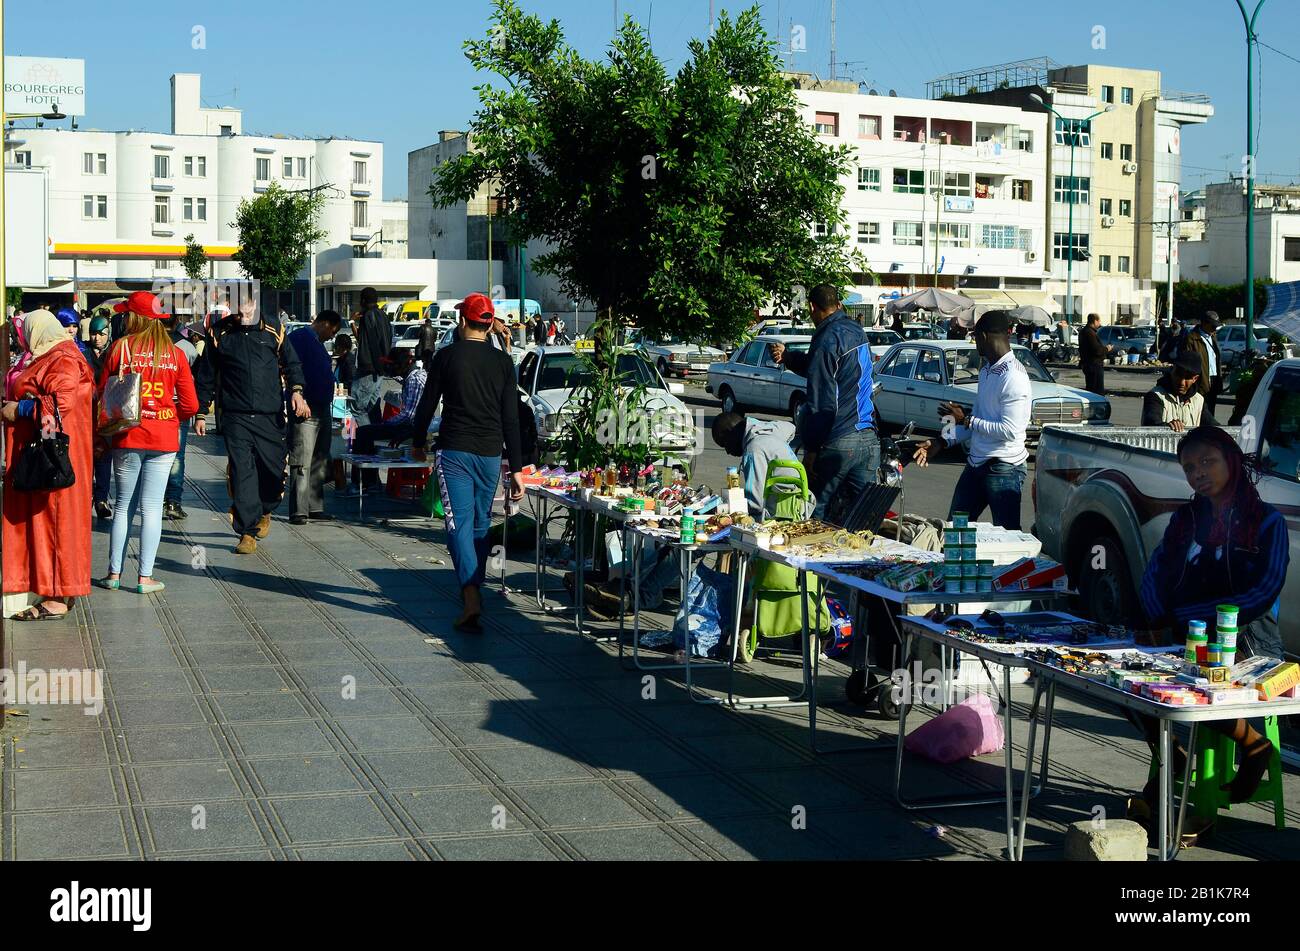 Meknes, Morocco - November 18th 2014: Unidentified people on street maket only for sub-Saharan Africans, Stock Photo